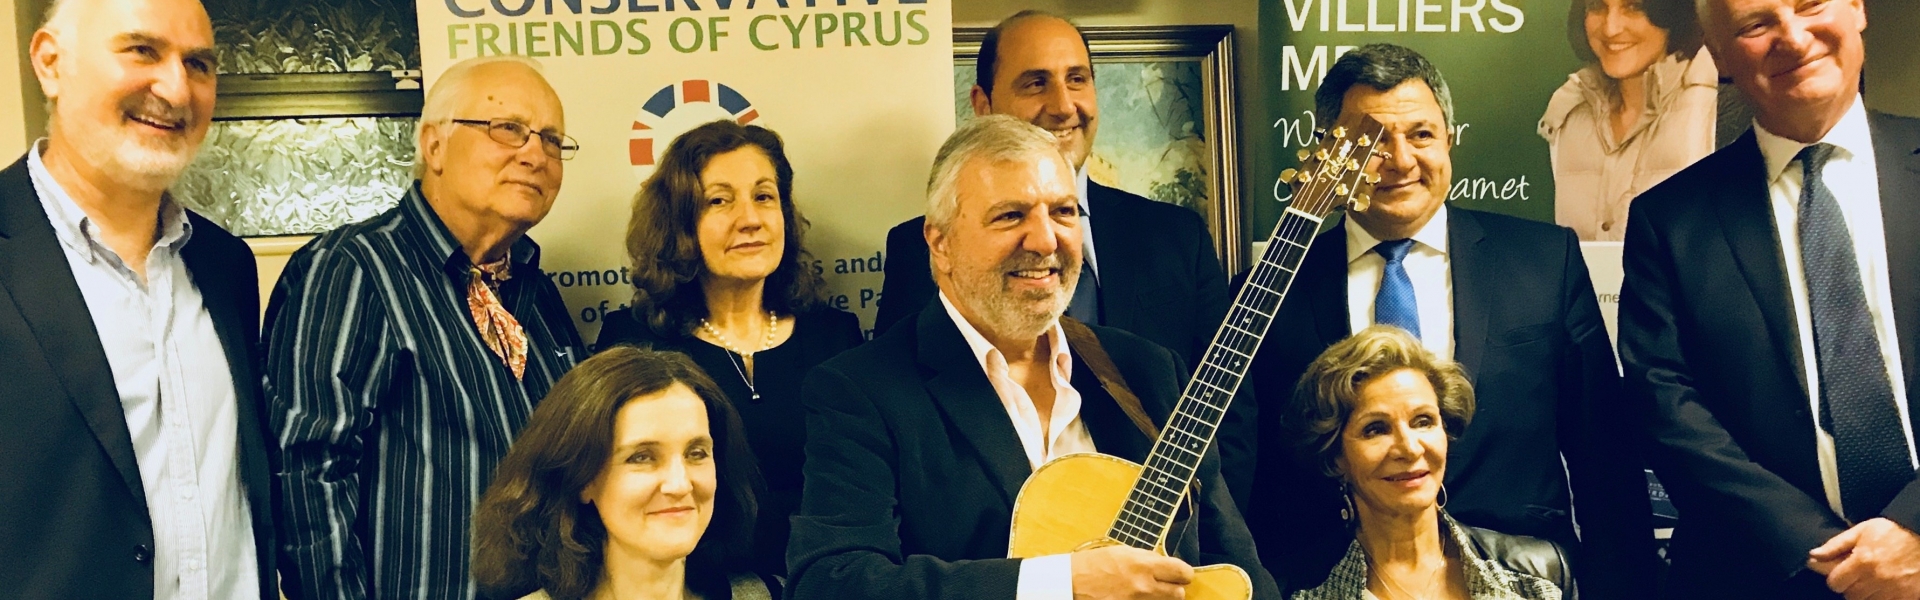 Cypriot event 